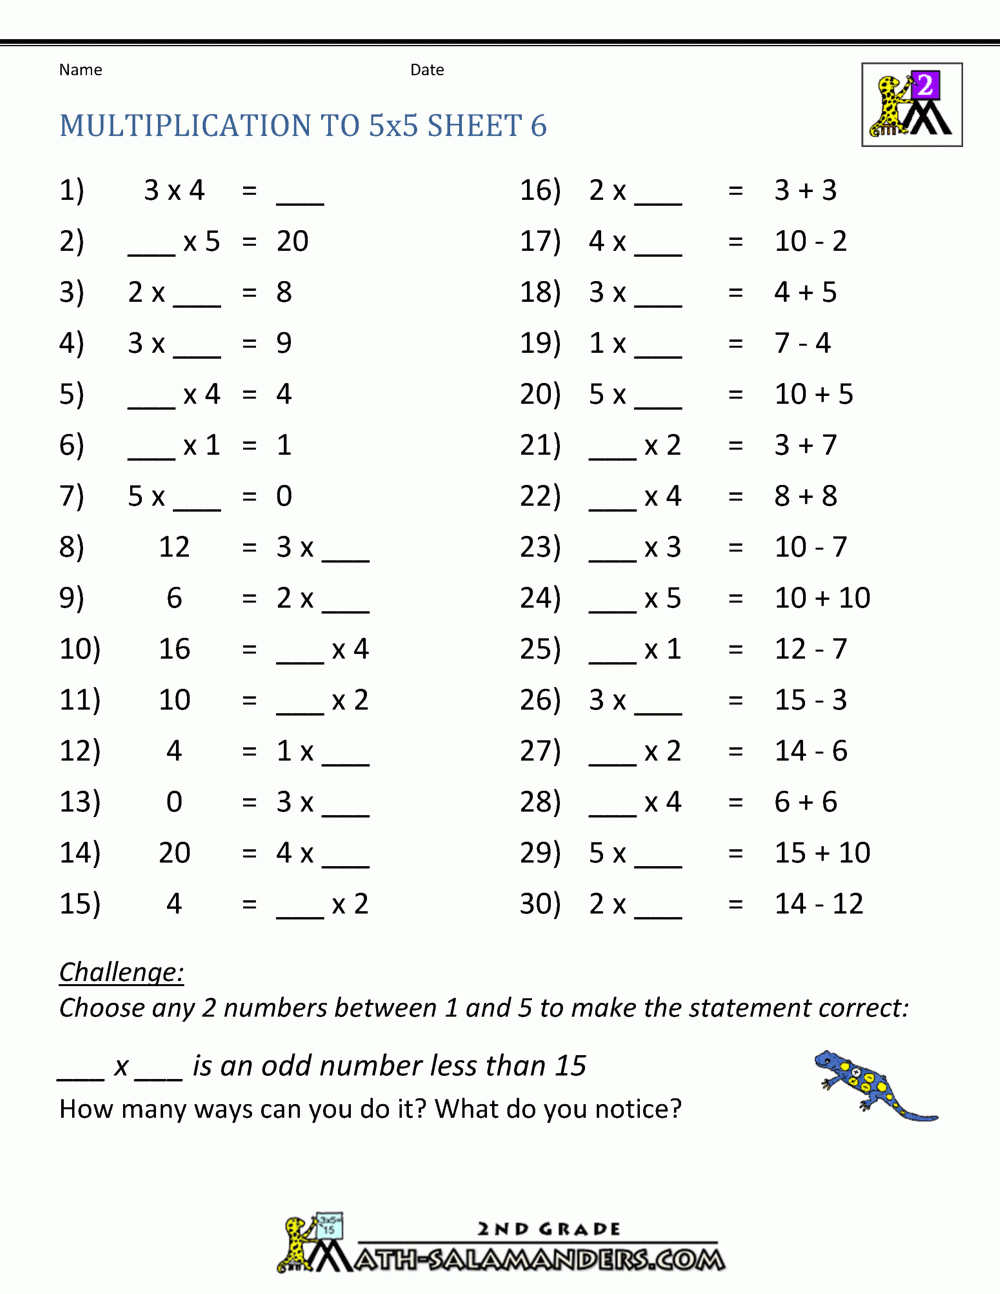 4s-table-multiplication-times-tables-worksheets